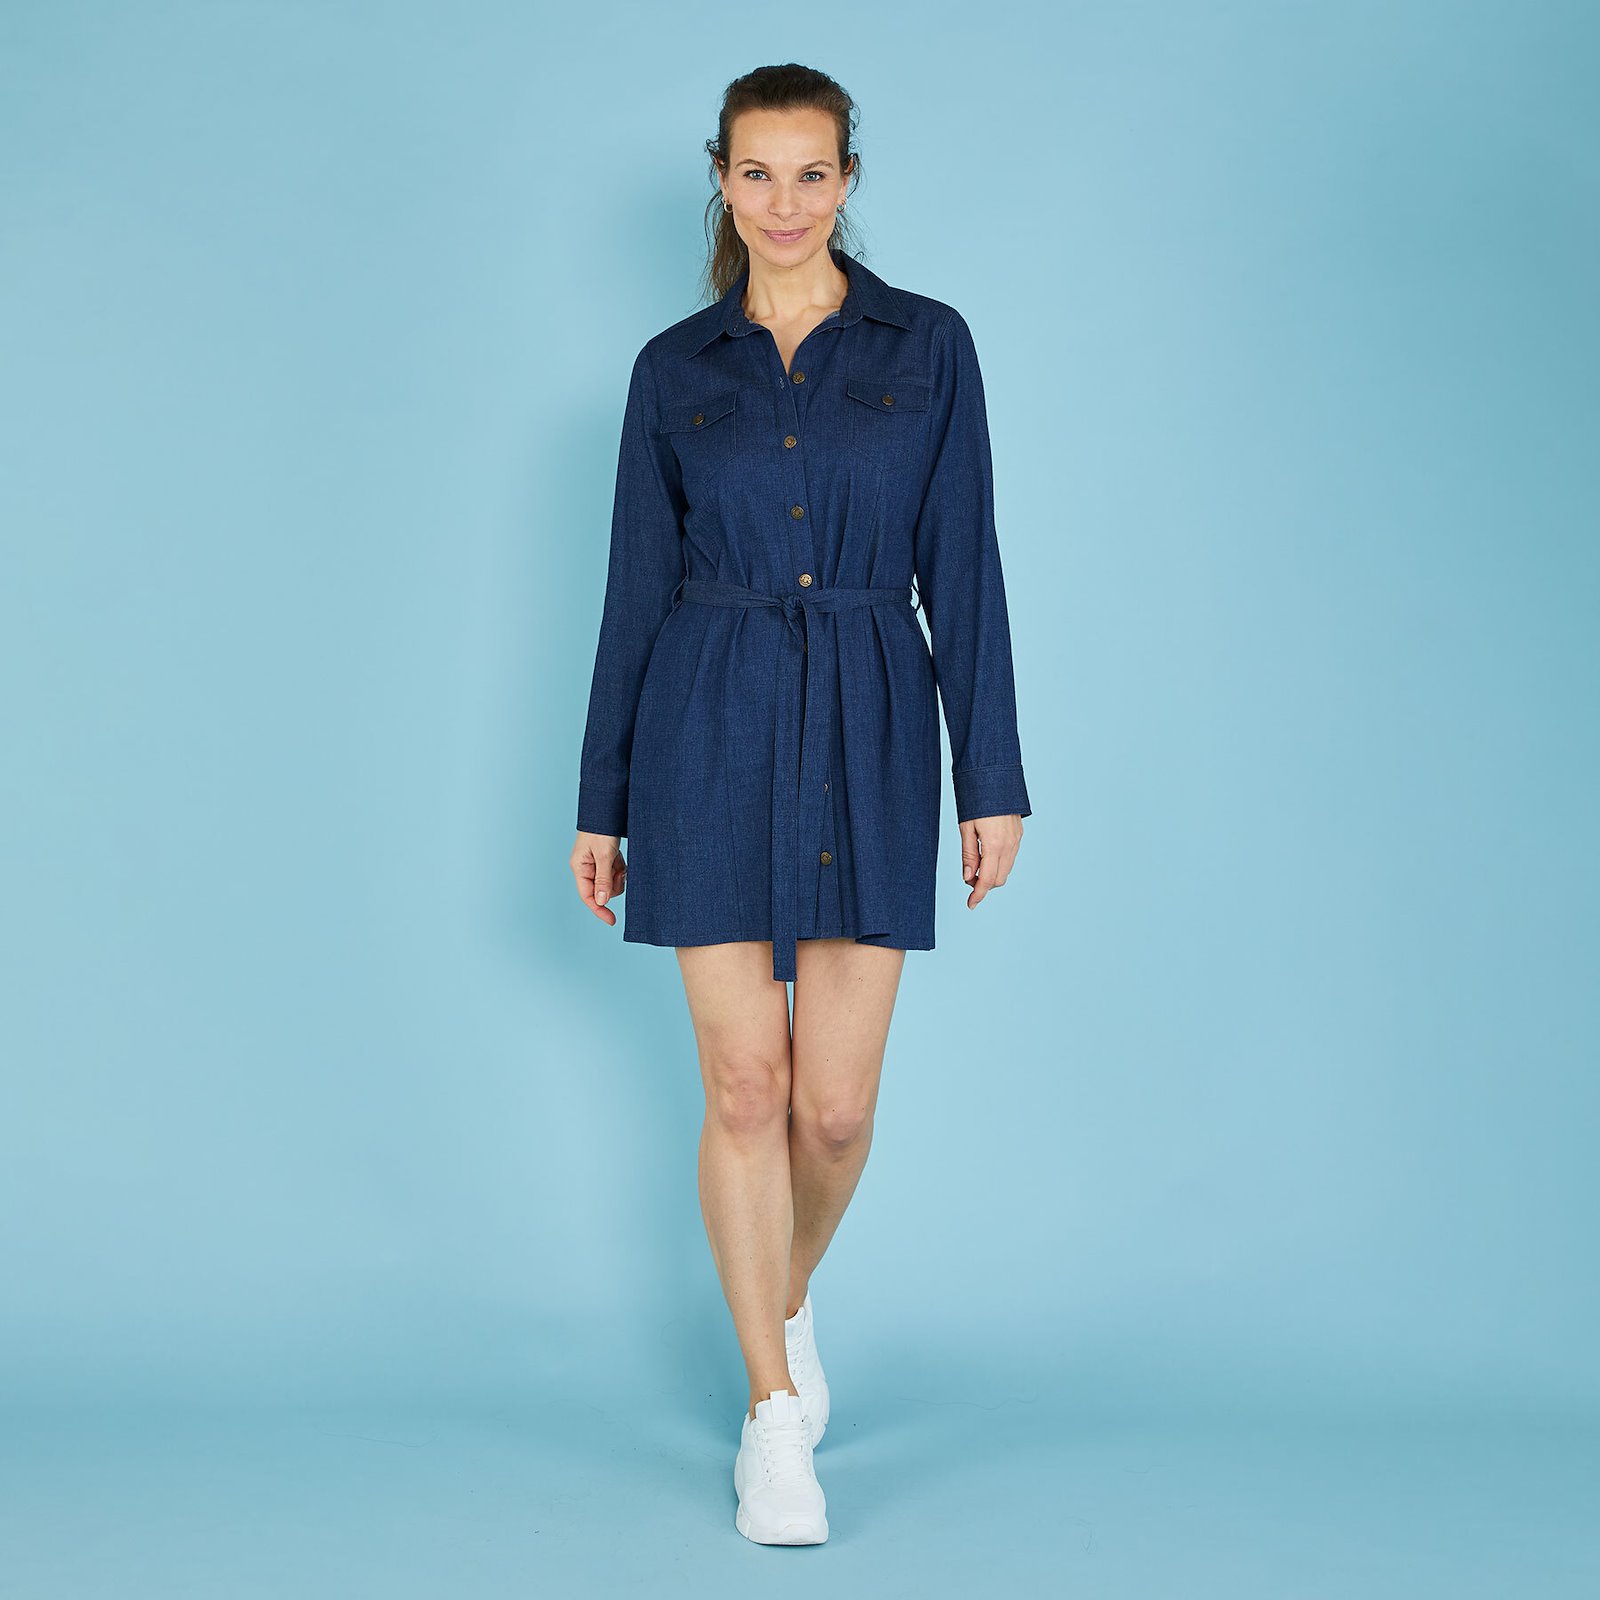 Fitted shirt dress with tie belt, 36/8 p23176000_p23176001_p23176002_p23176003_p23176004_pack_d